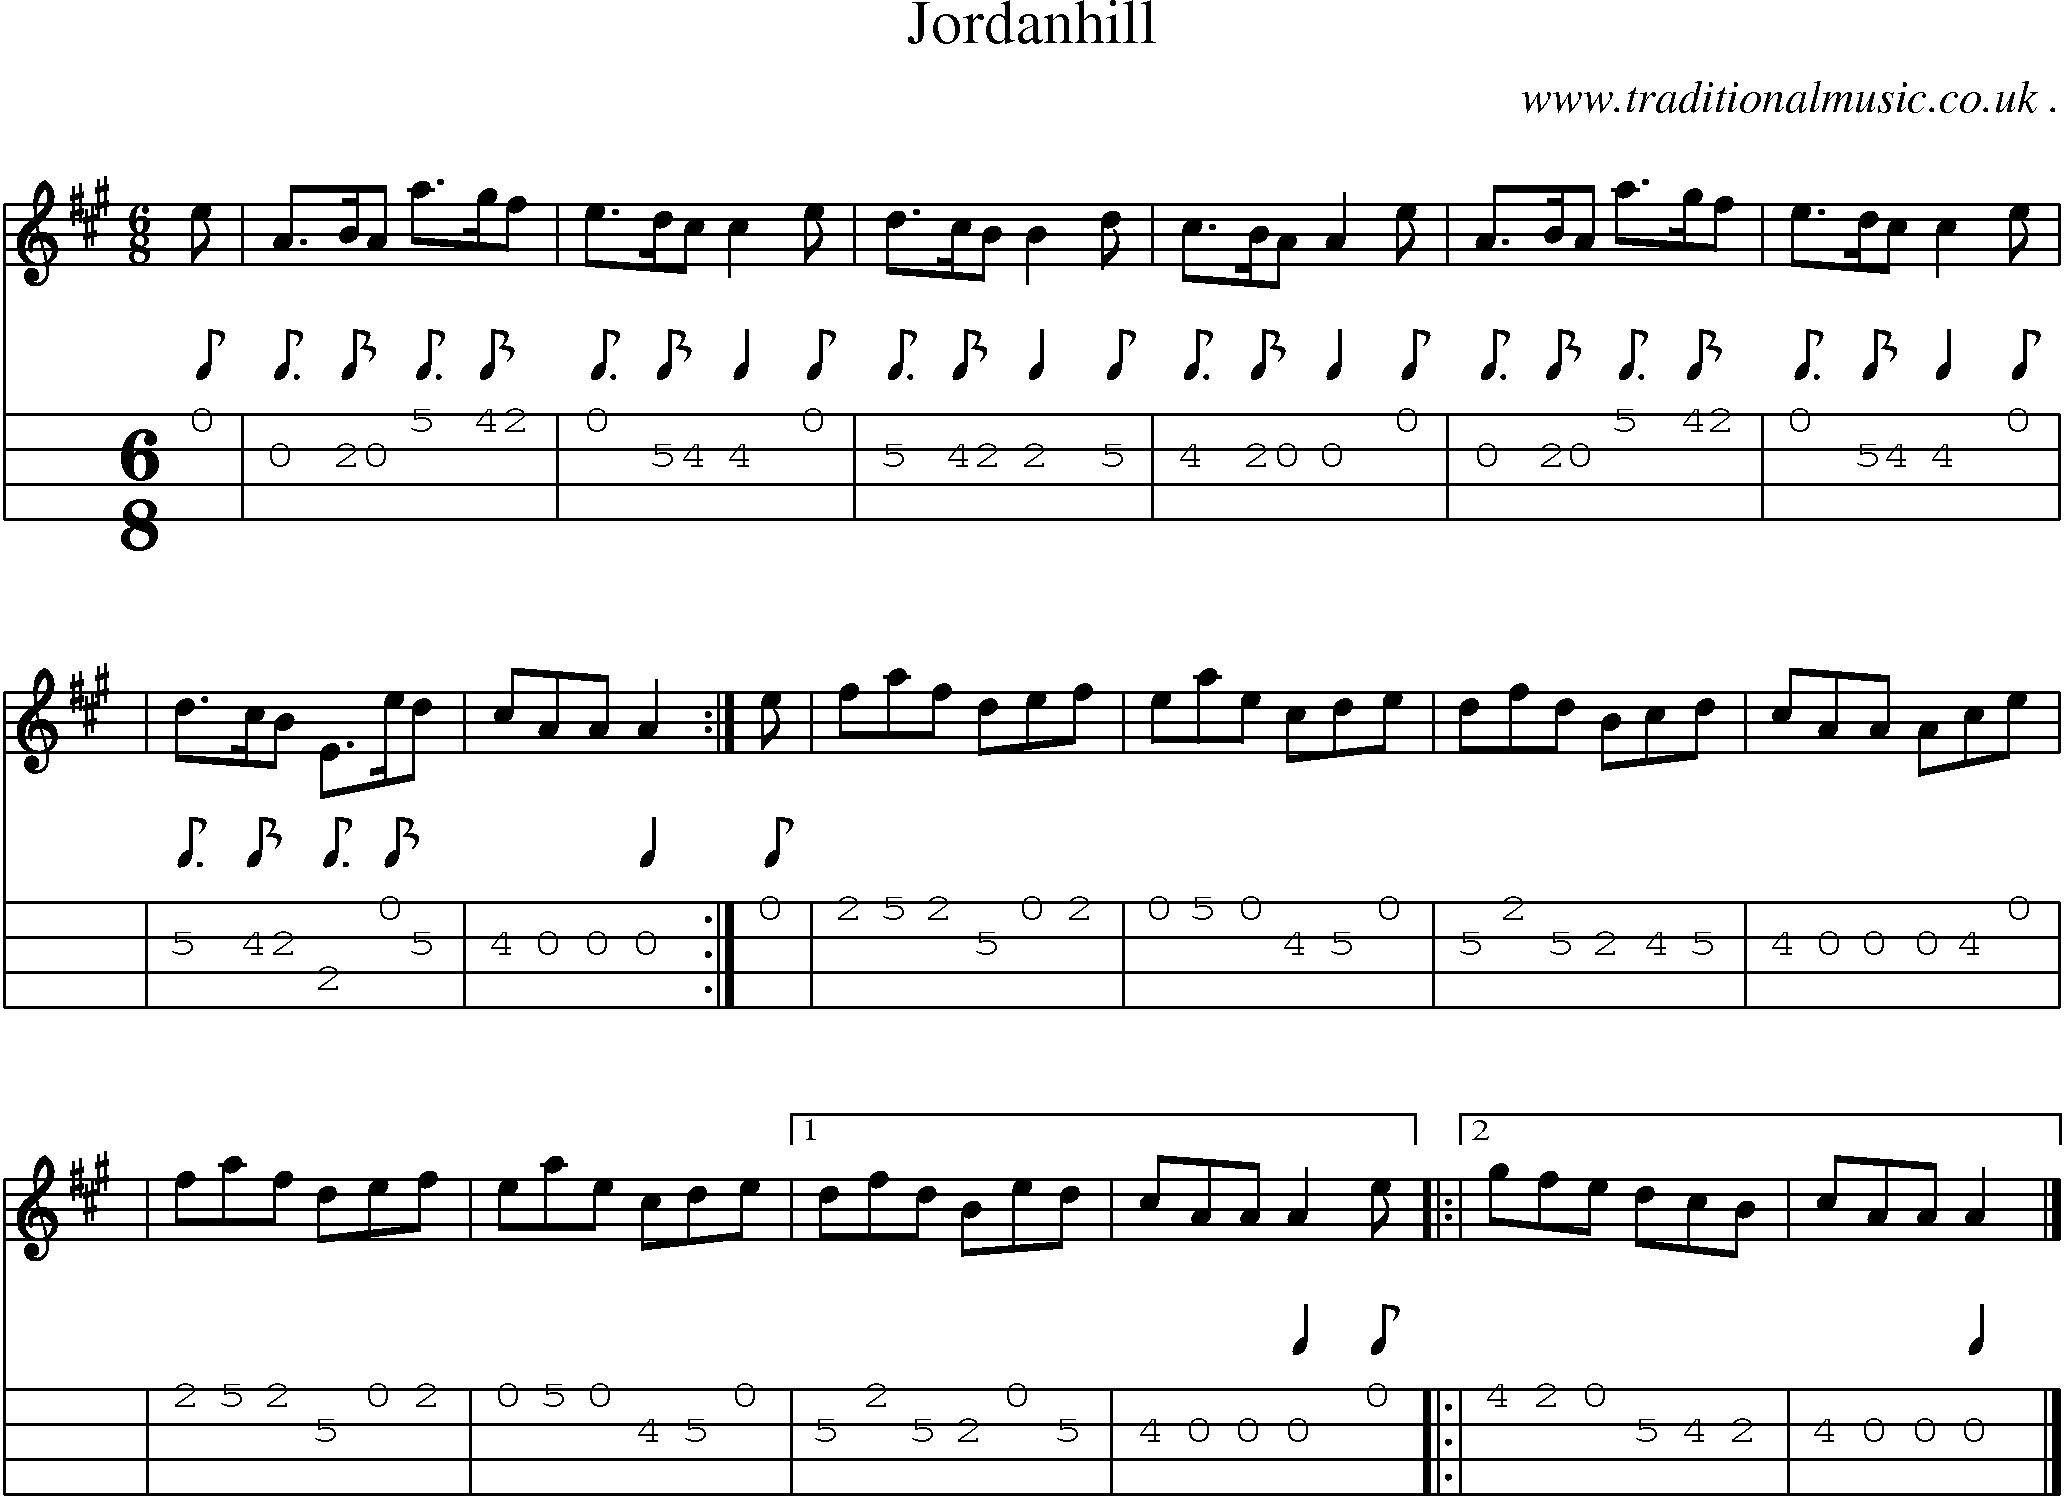 Sheet-music  score, Chords and Mandolin Tabs for Jordanhill